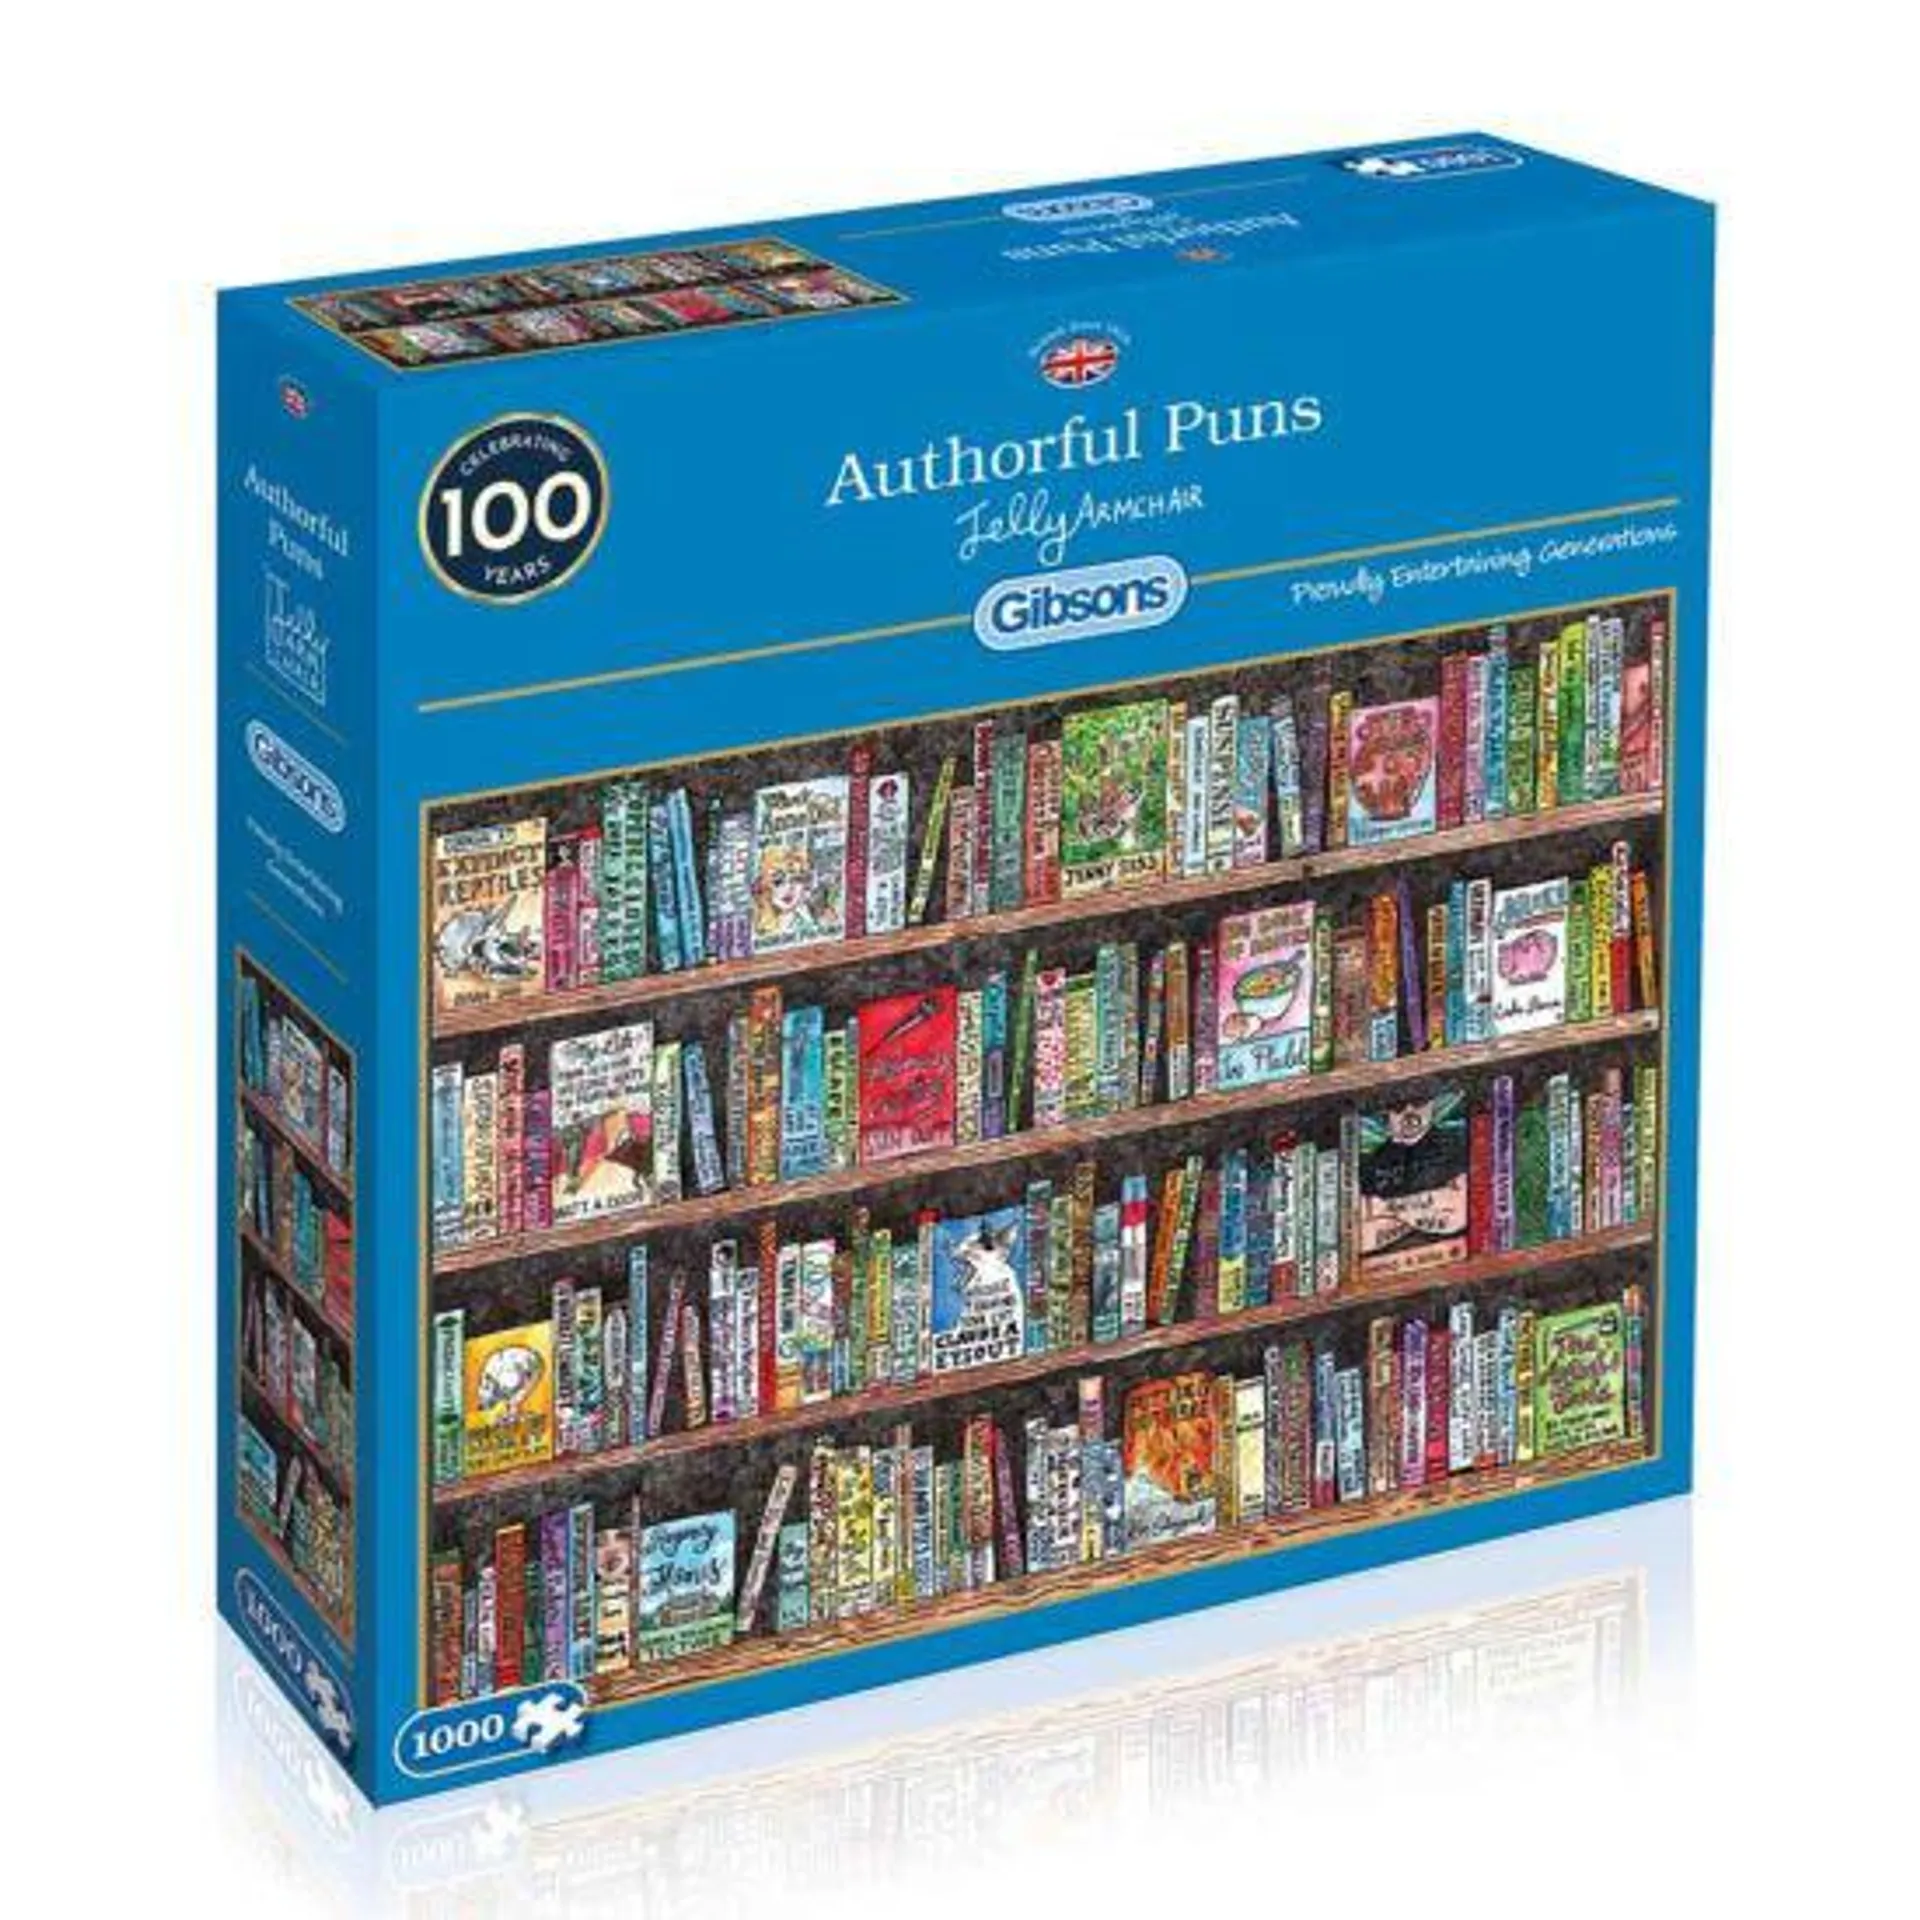 Gibsons Authorful Puns 1000 Piece Jigsaw Puzzle